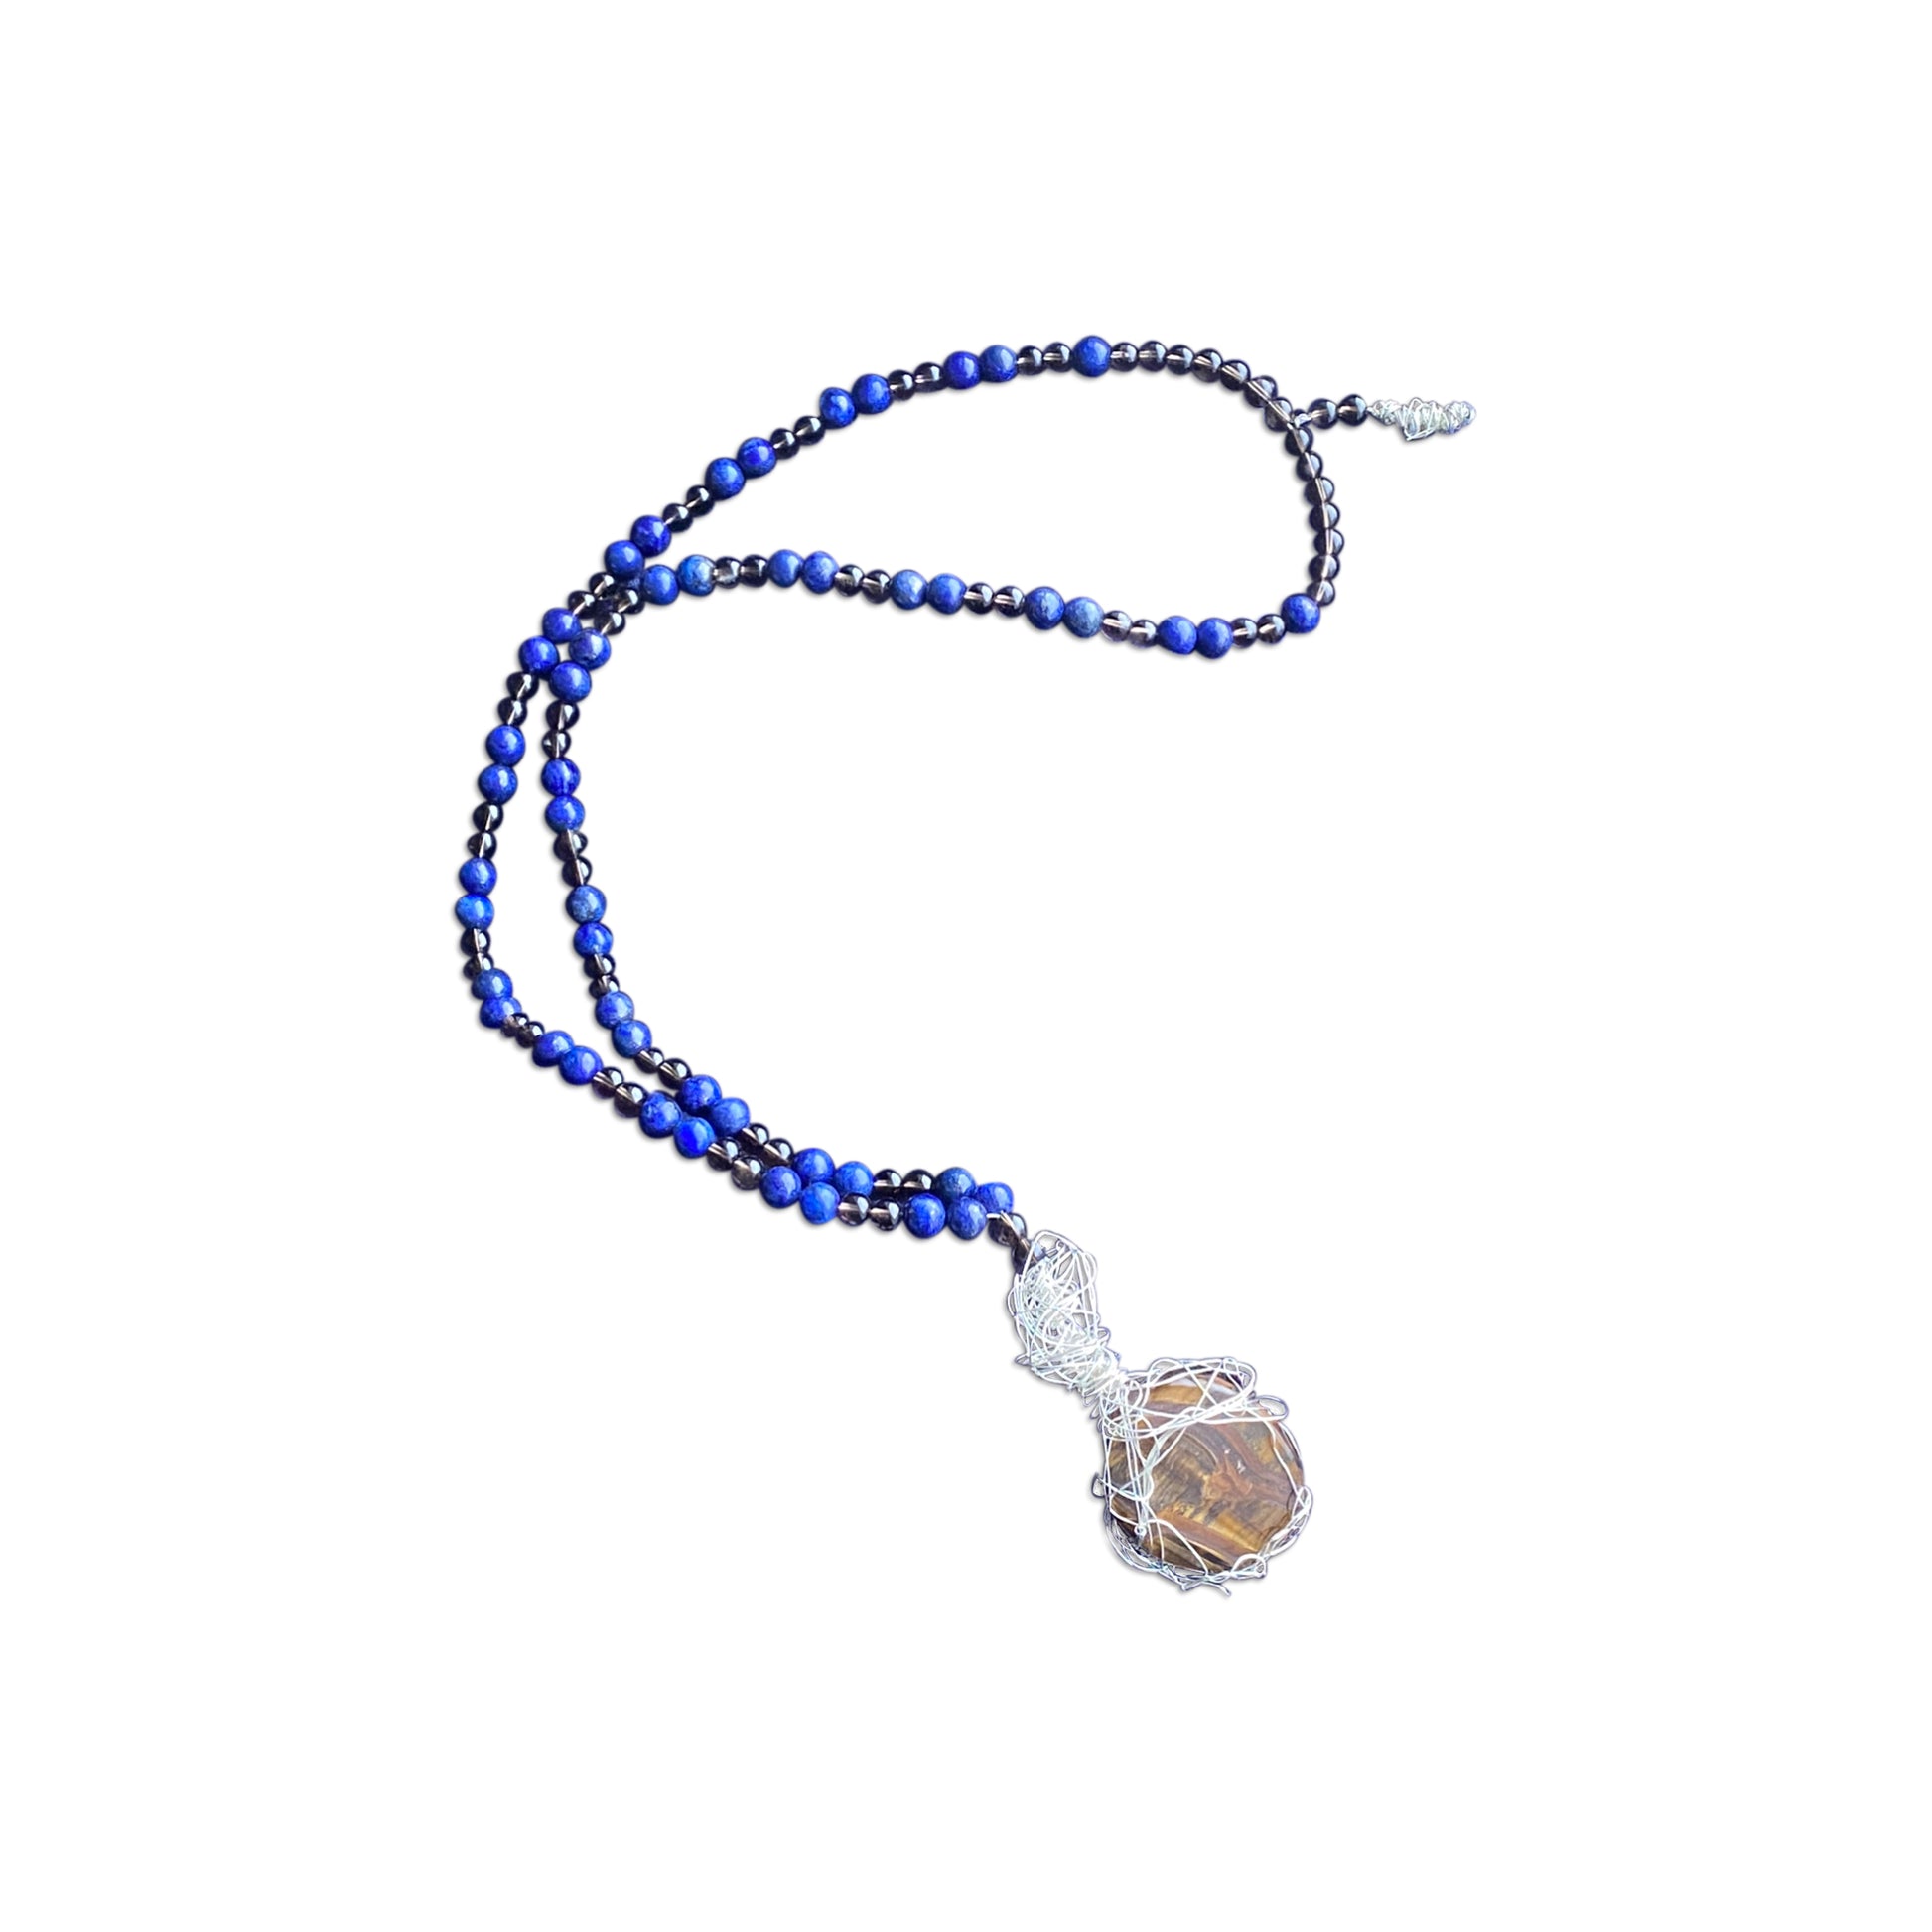 Alessandra Mattanza | BLU TIGER POWER - An ART TOTEM NECKLACE, created from precious and semiprecious stones, for good energy and luck, to be hung on a wall, displayed on a table, or worn only on very special occasions.